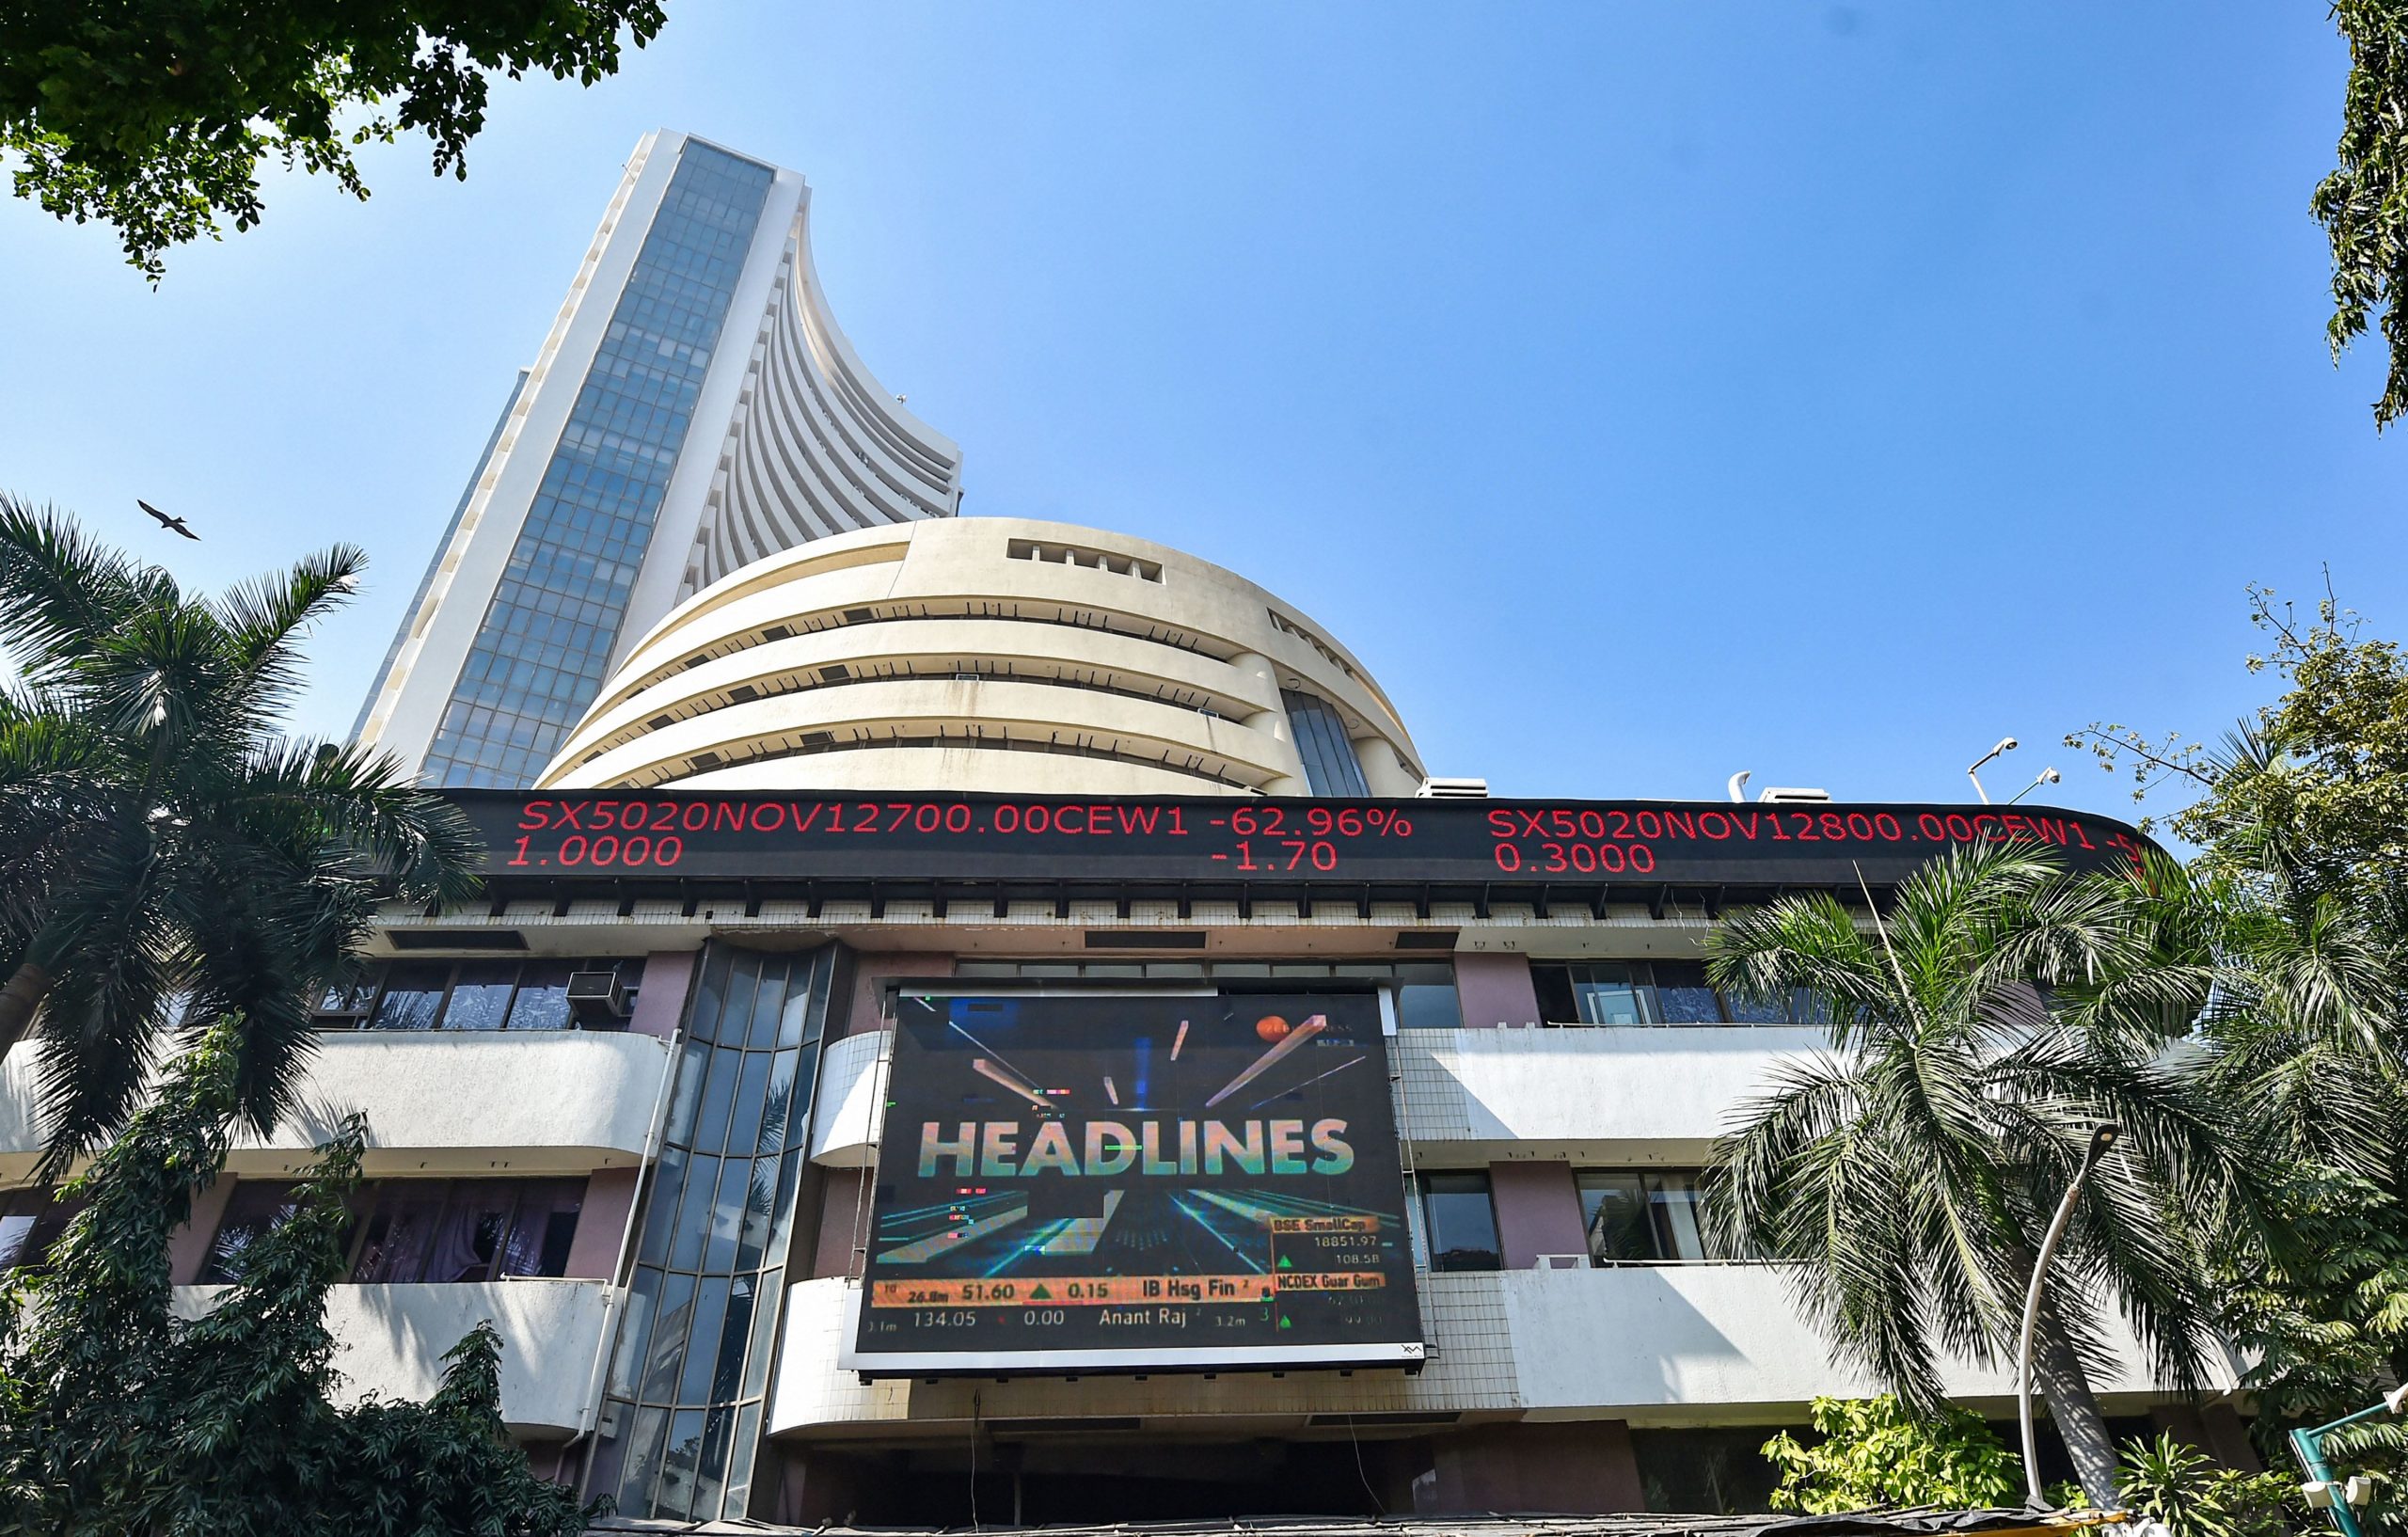 Trending Stocks: Adani Green, Eicher Motors, Bata and others in news today